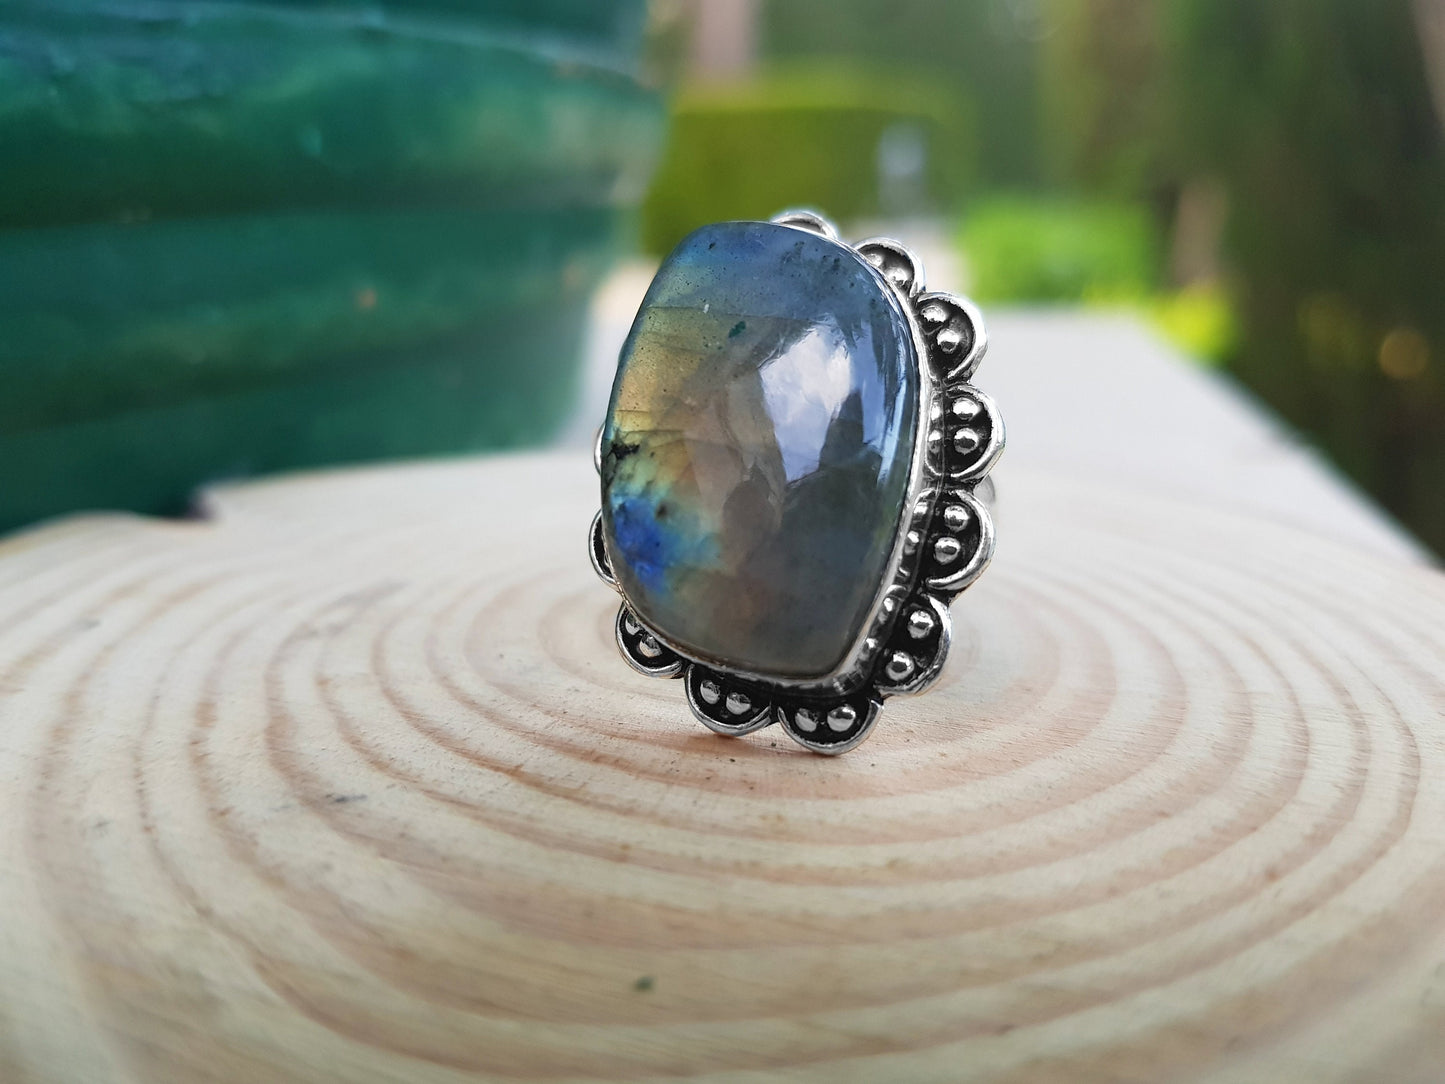 Labradorite Ring Size US 8 3/4 In Sterling Silver Crystal Ring Boho Rings Unique Gift For Her Ethnic Ring GypsyJewelry